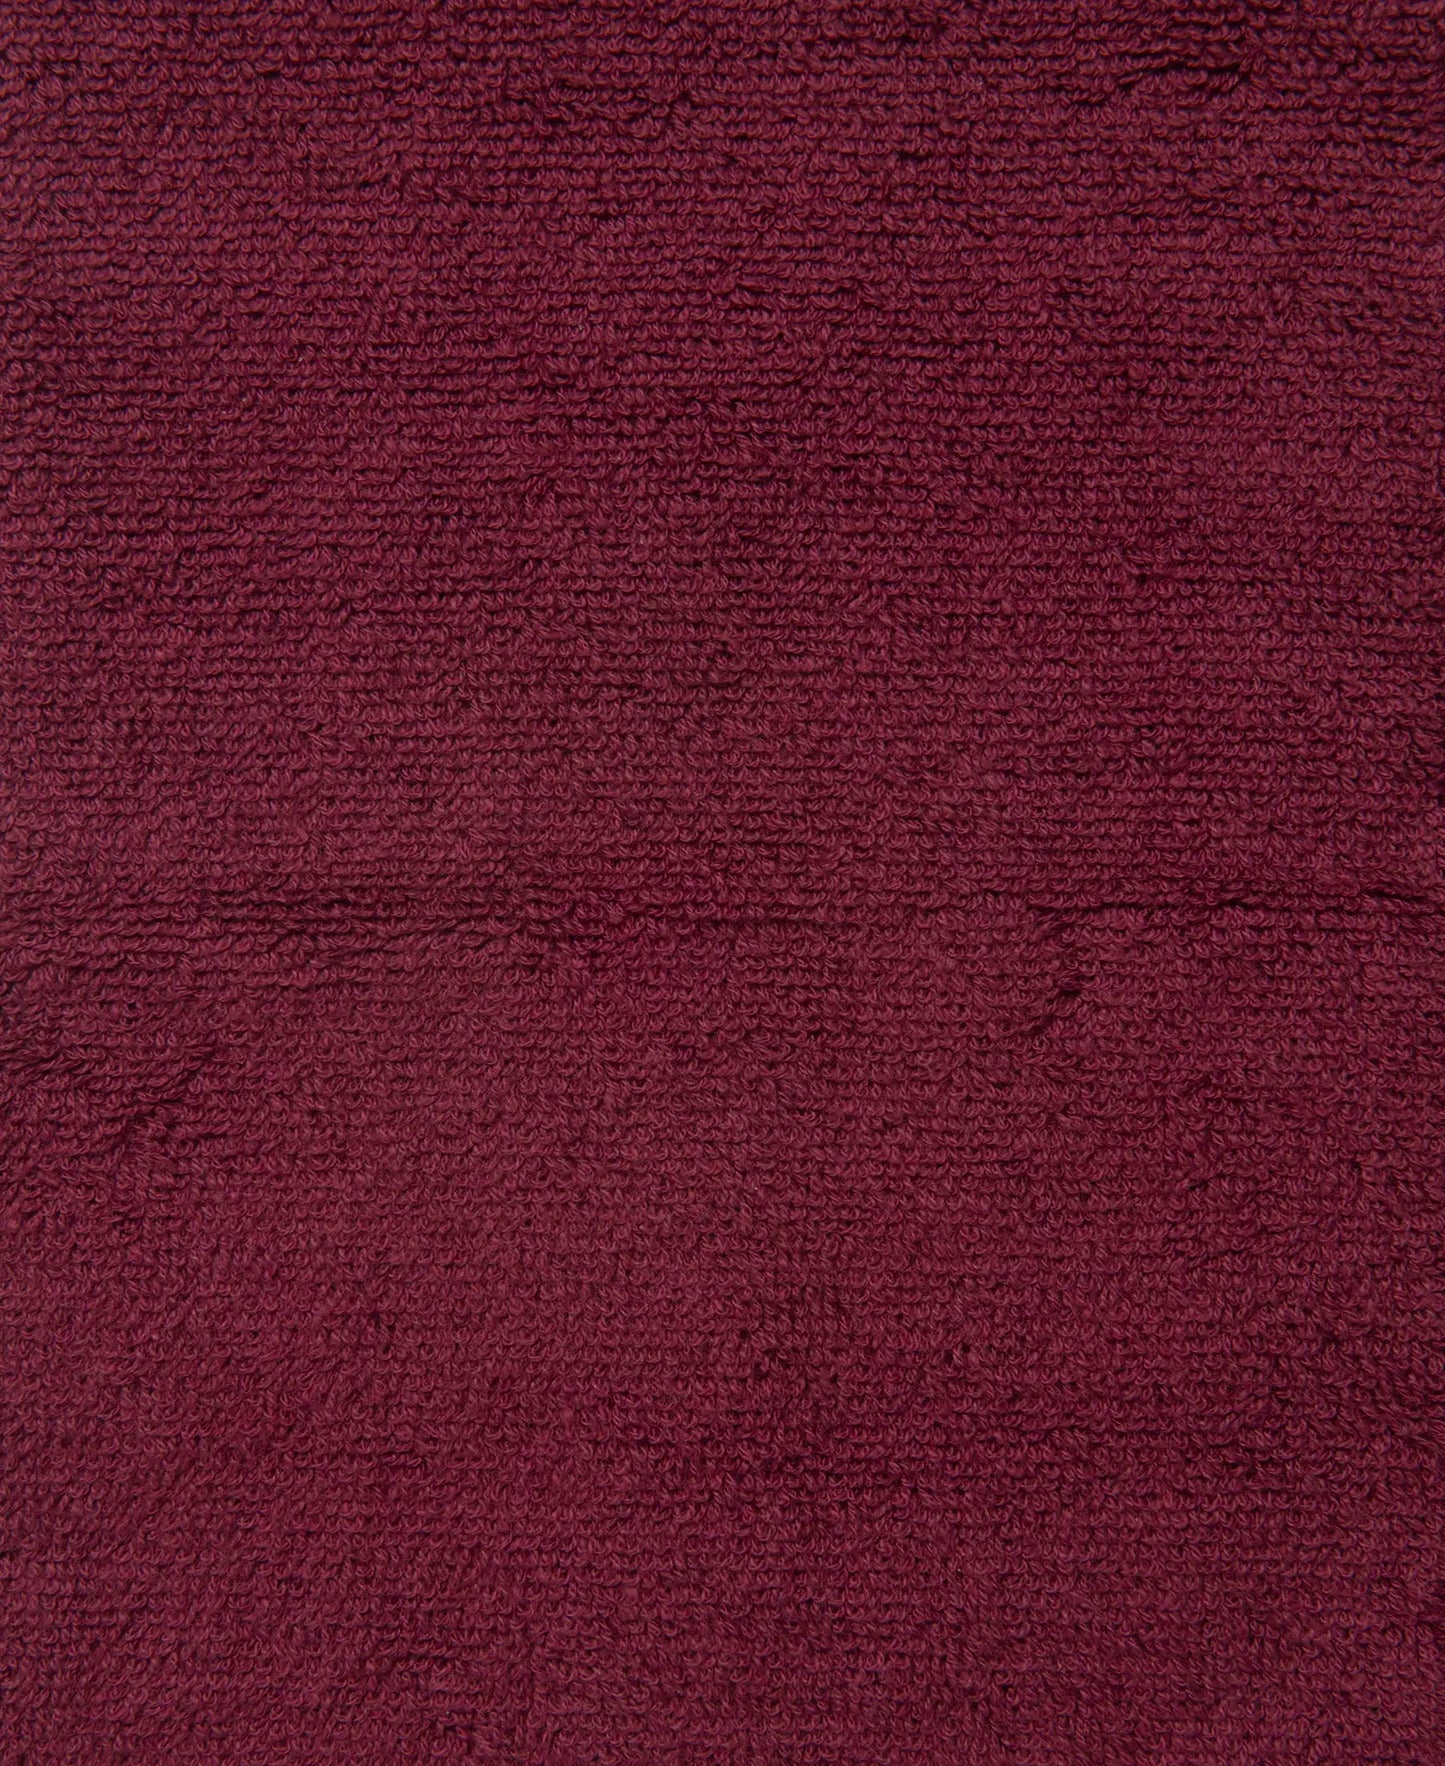 Cotton Terry Ultrasoft and Durable Solid Face Towel - Burgundy-4